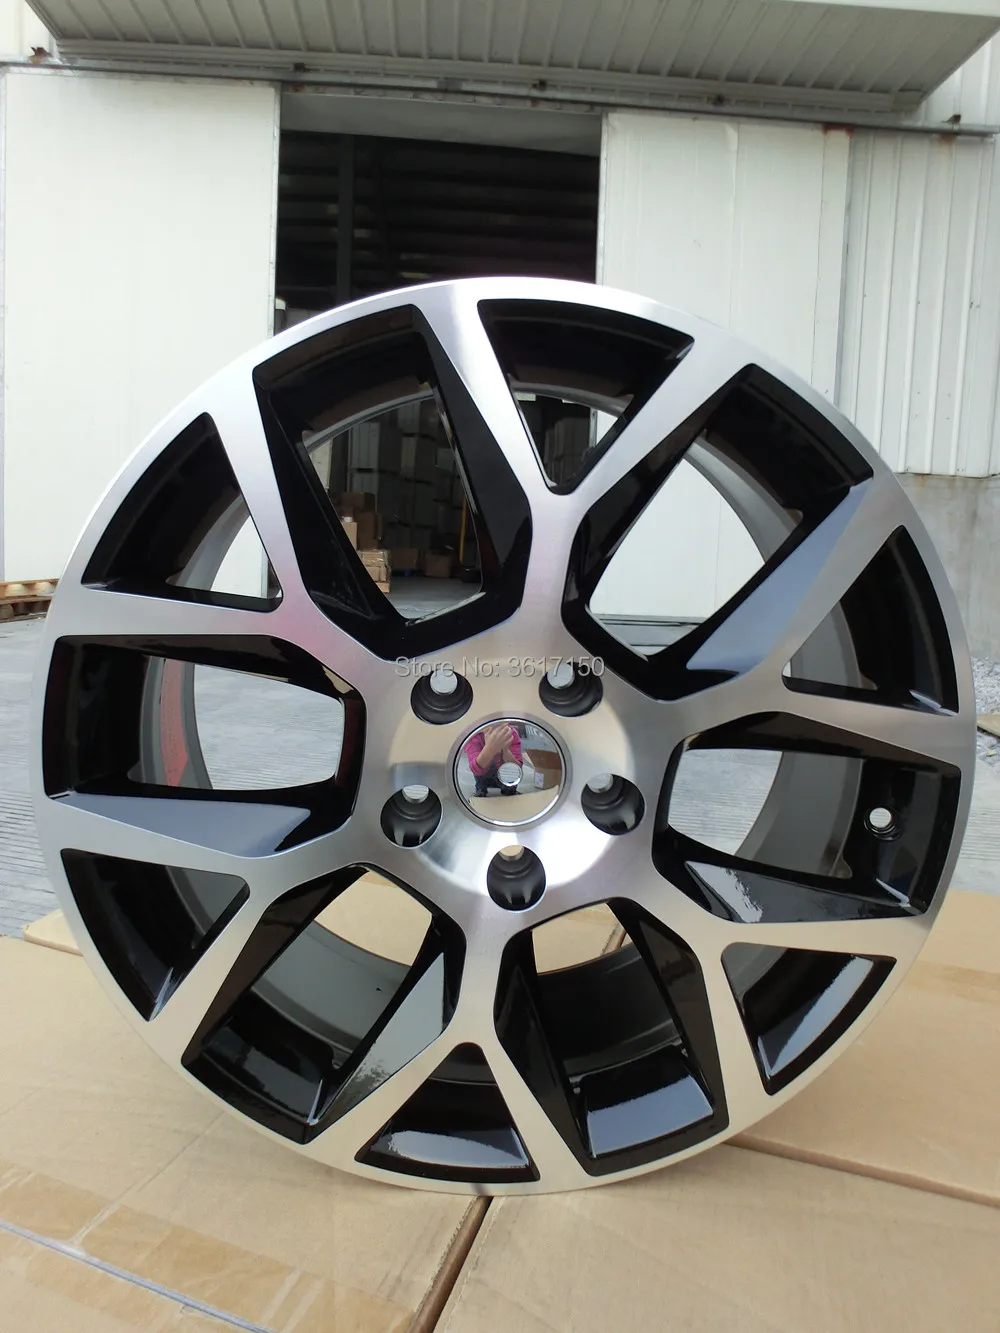 

17x7.5J Wheel Rims Of The PCD 5x112 Center Broe 57.1 ET45 With The Hub Caps